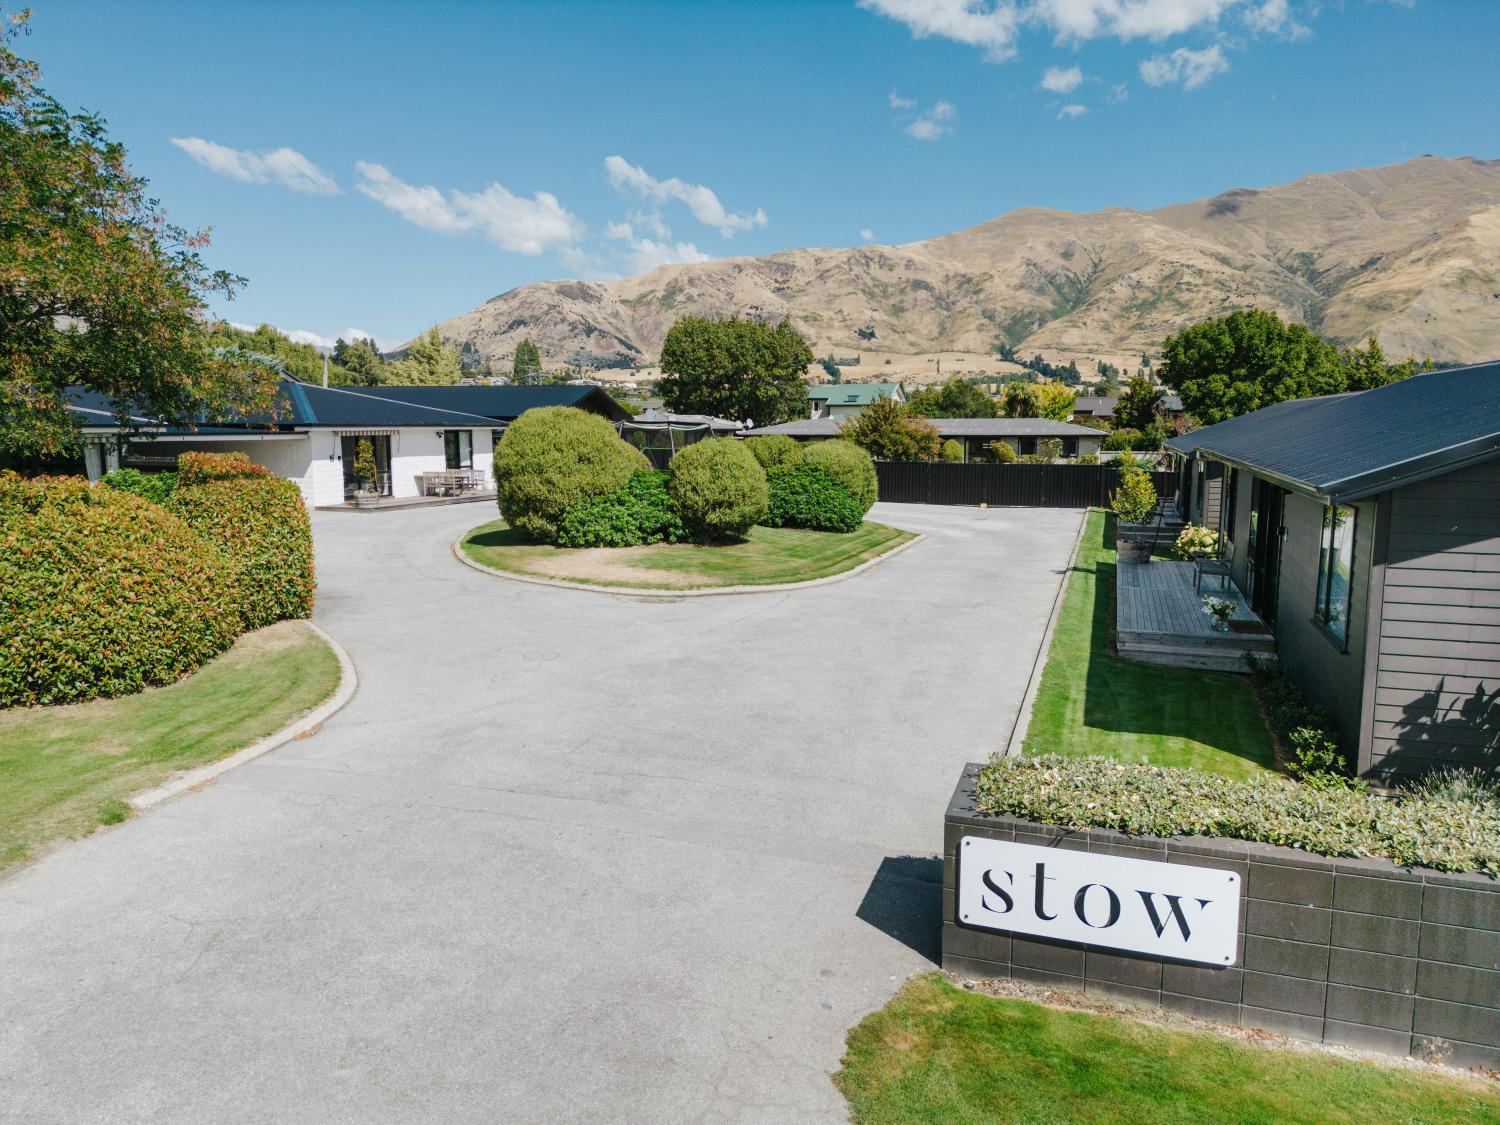 4 - Charming Space, Just a Stone Throw from Central Wanaka, Queenstown-Lakes